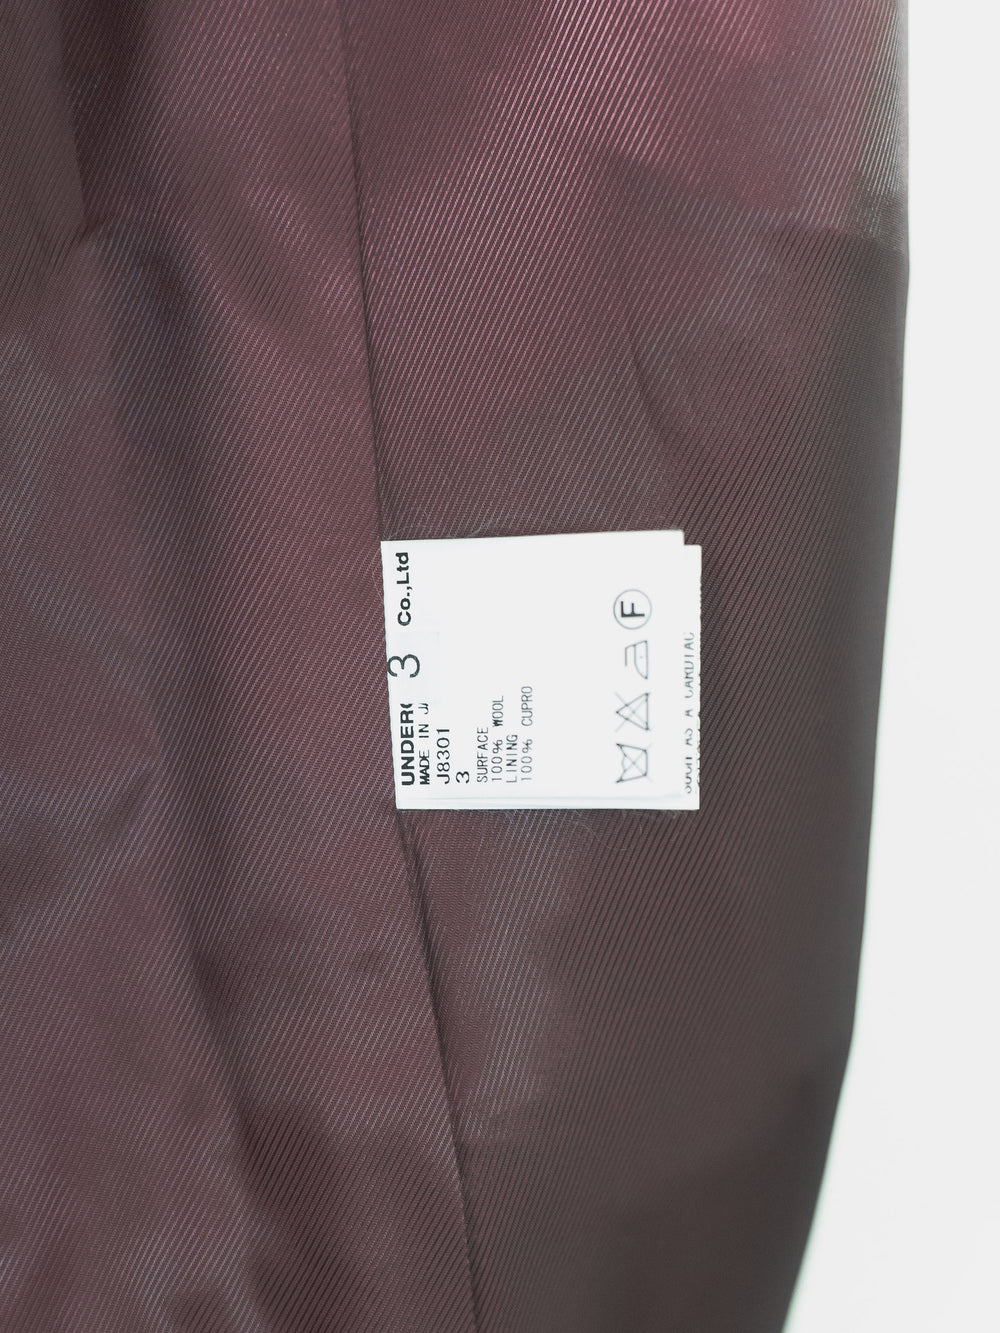 Undercover AW12 Psychocolor Chester Coat